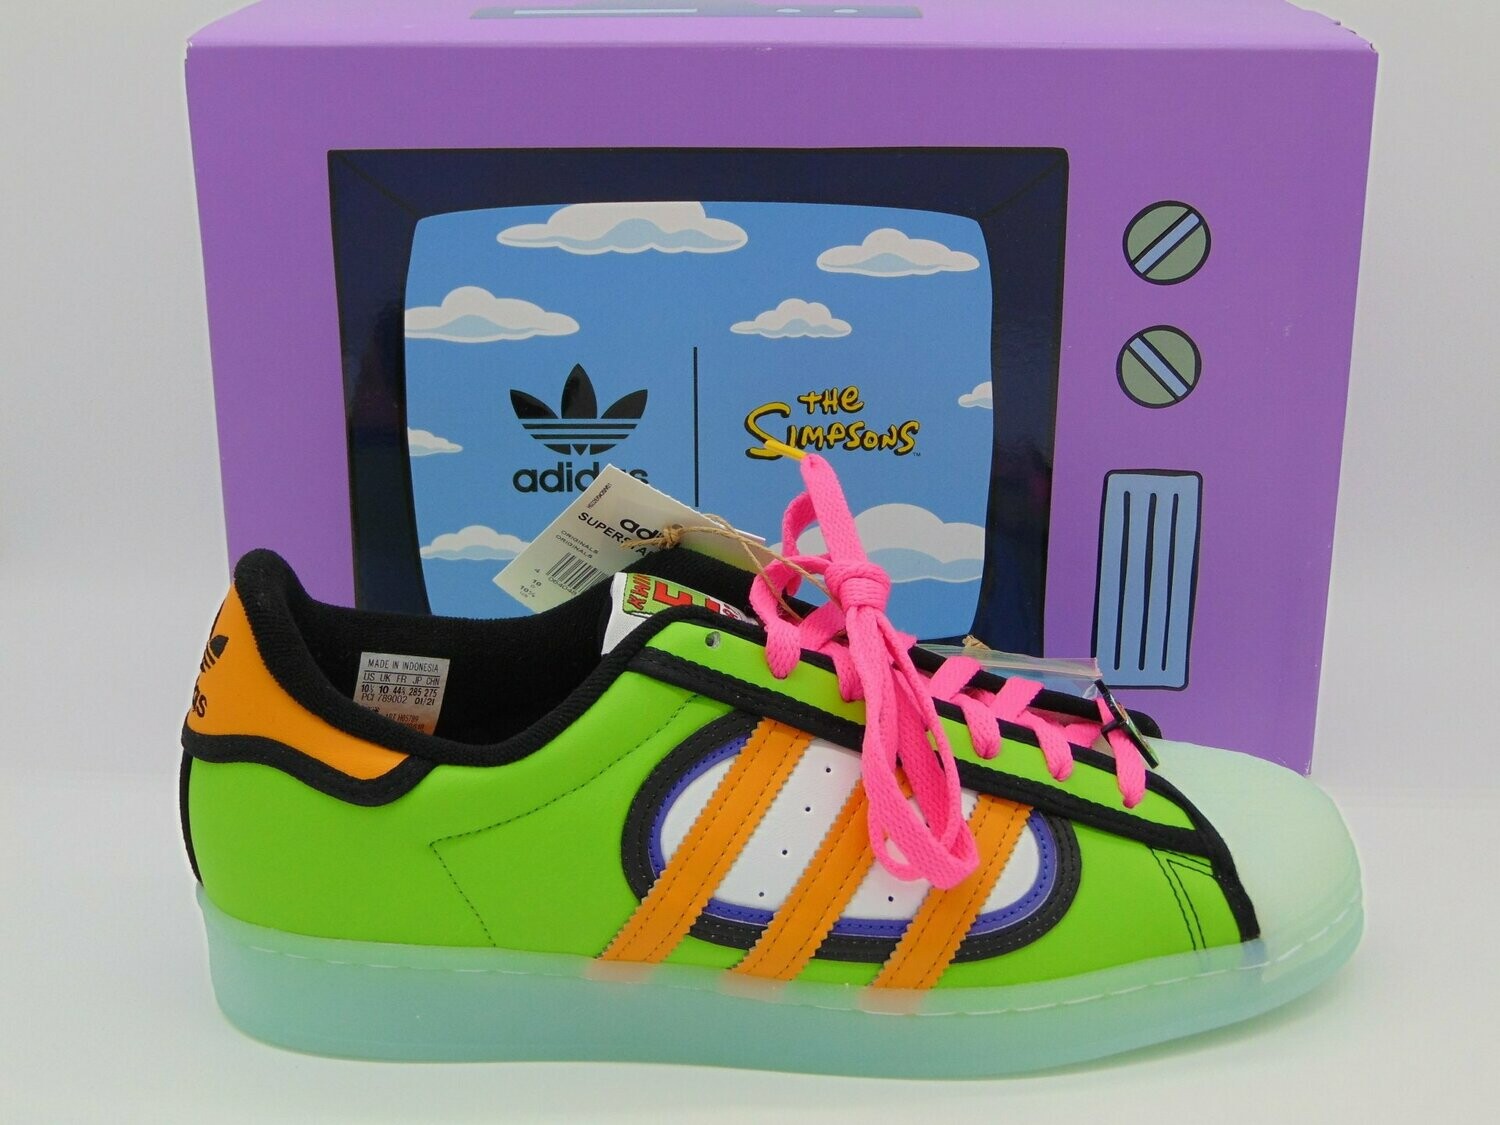 Adidas Superstar X The Simpsons "Squishee" 44 2/3